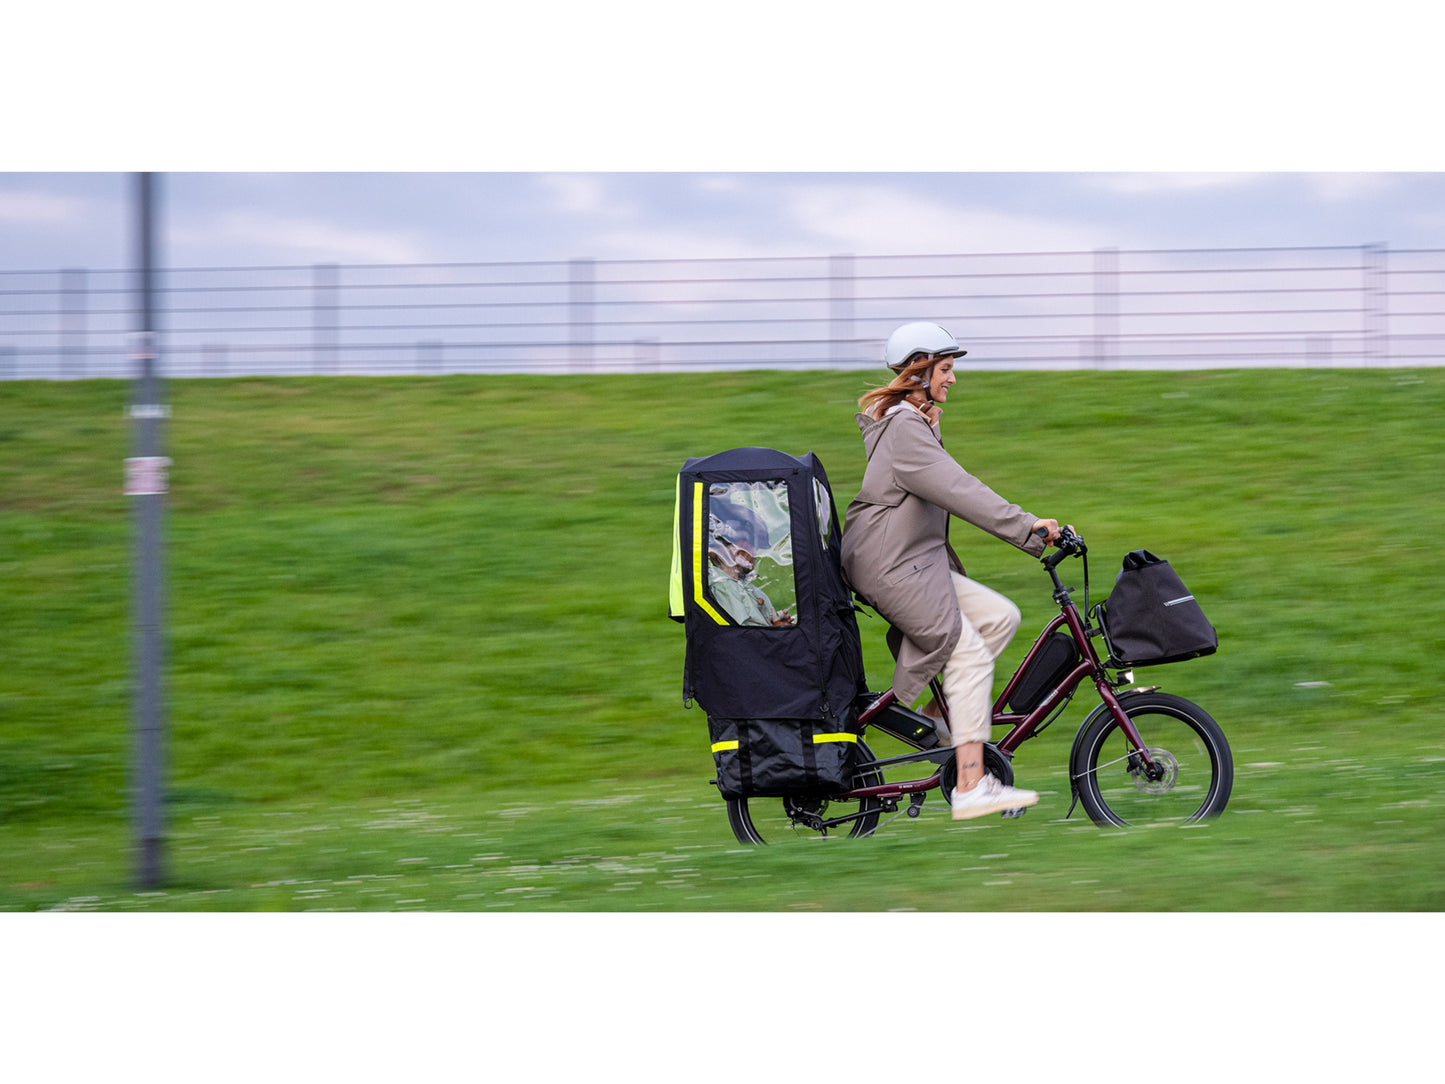 Tern Quick Haul D8 electric cargo bike woman and child riding on city bike path